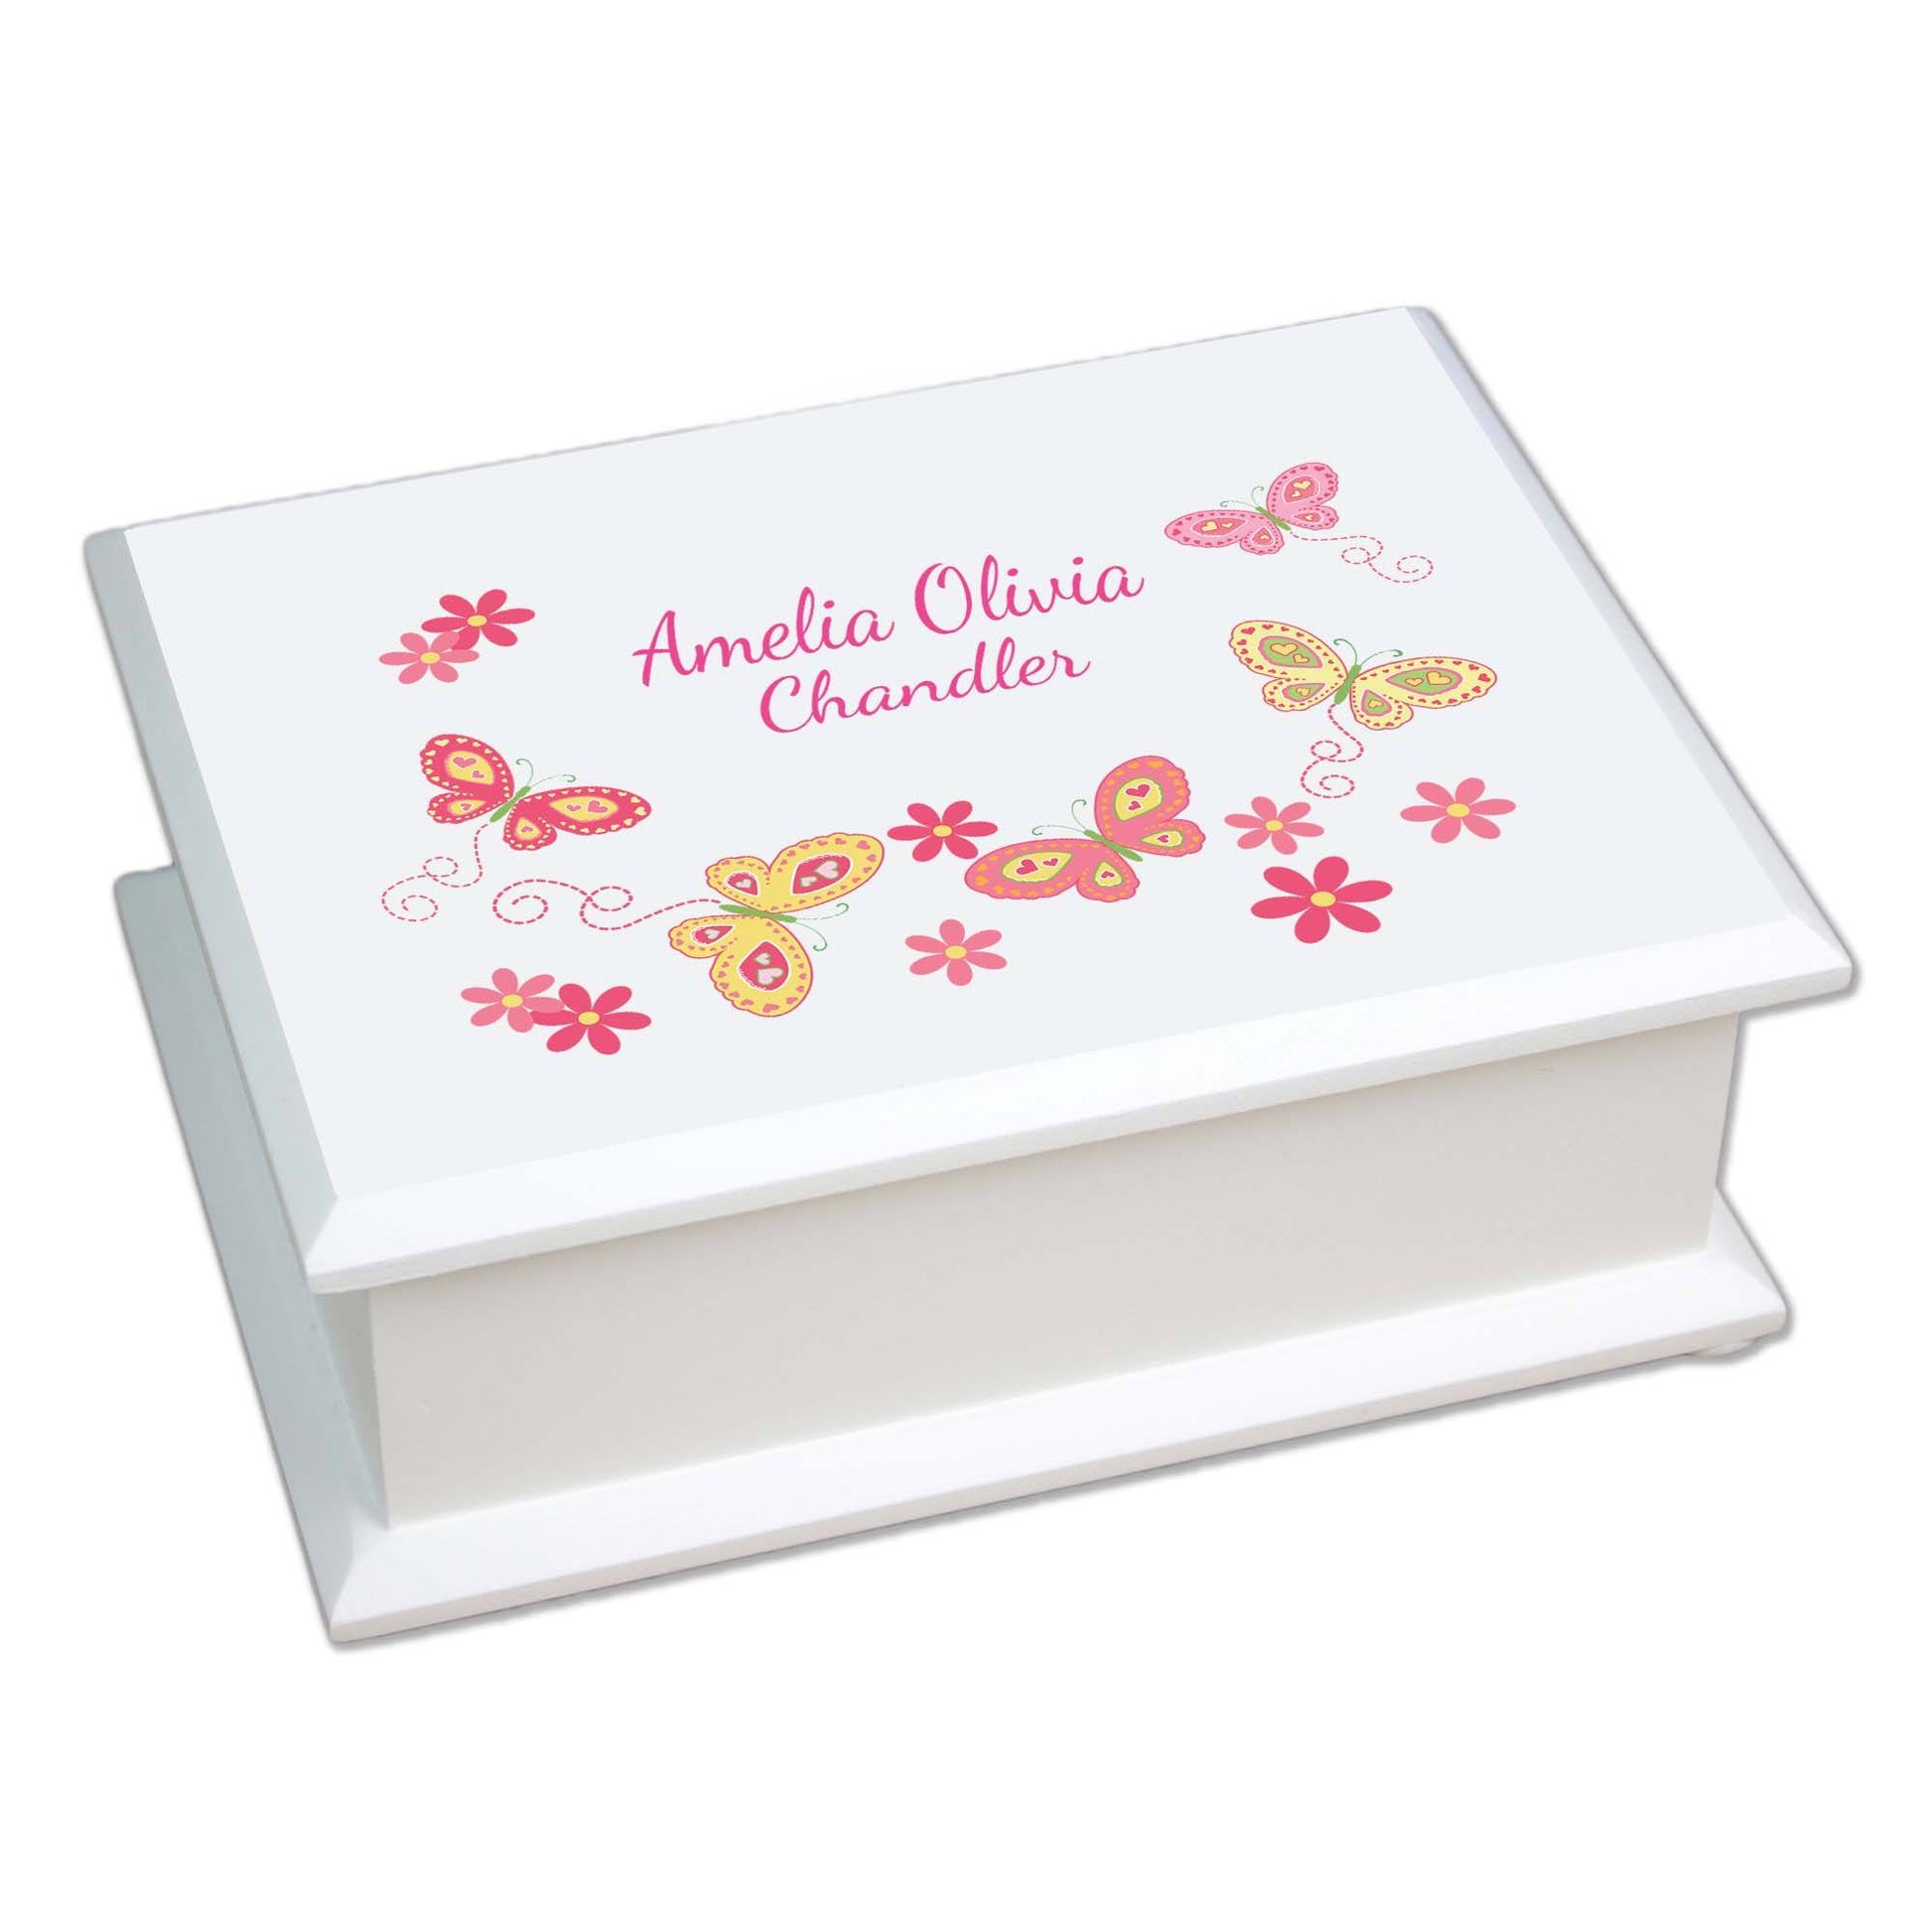 Personalized Lift Top Jewelry Box with Butterflies Yellow Pink design